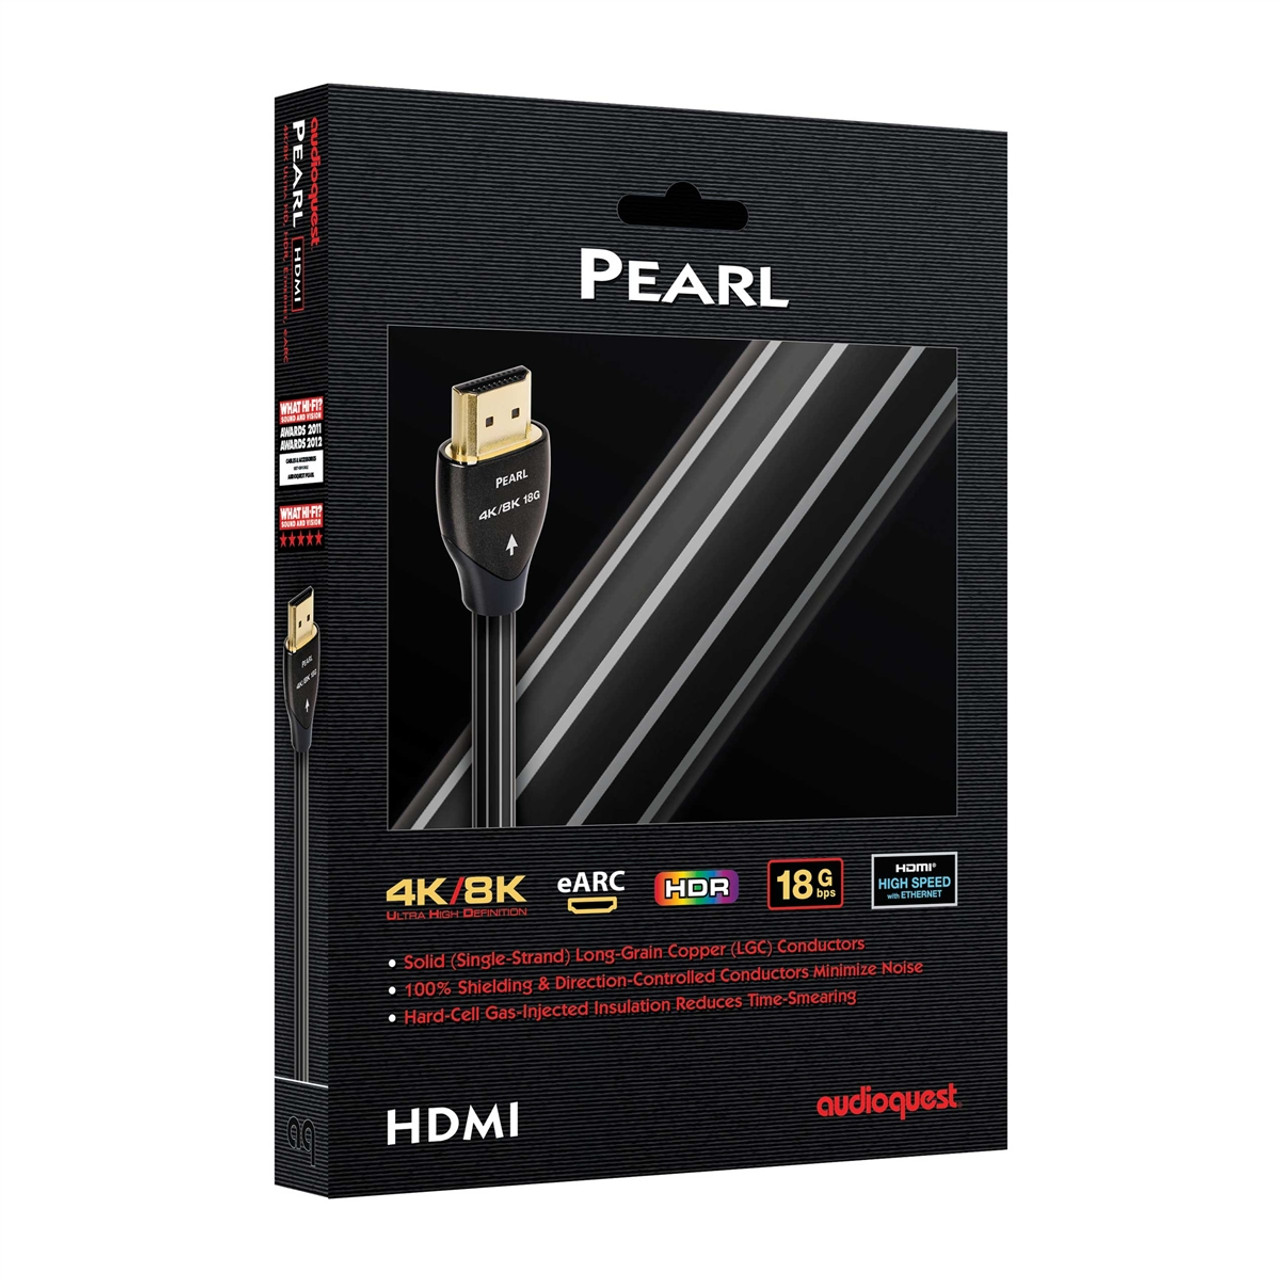 AUDIOQUEST HDM48PEA300 Pearl 48 3m HDMI High Speed Cable with Ethernet  Connection - Black/White